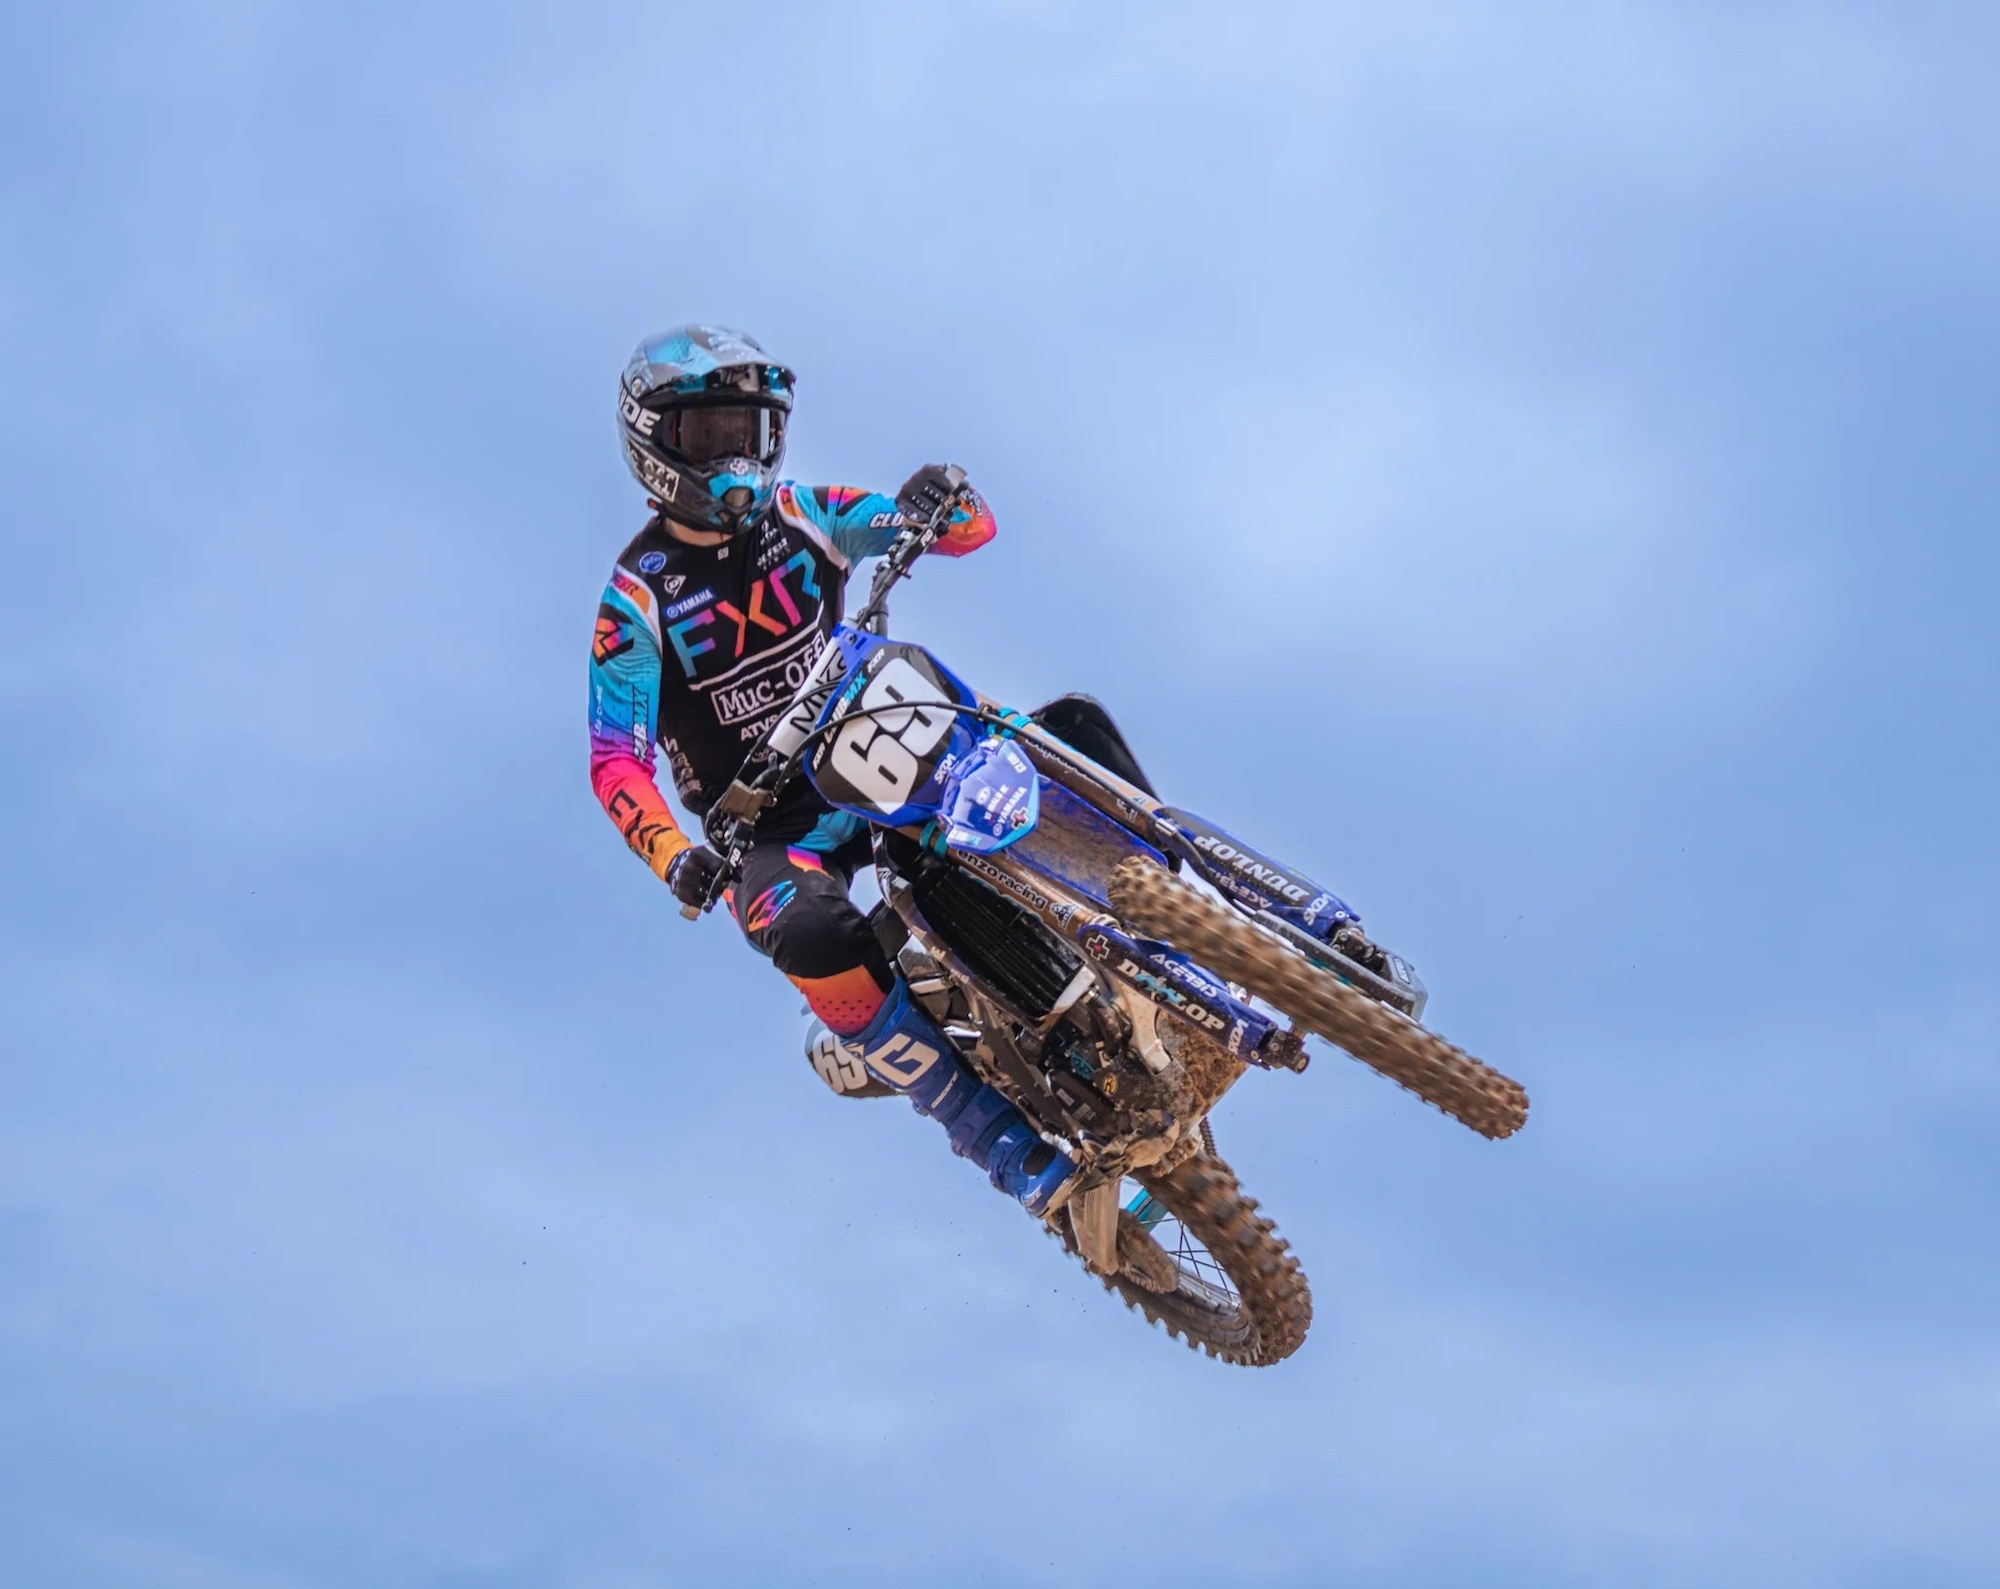 Muc-Off's team for 2023's Supercross. Media sourced from Muc-Off's website.